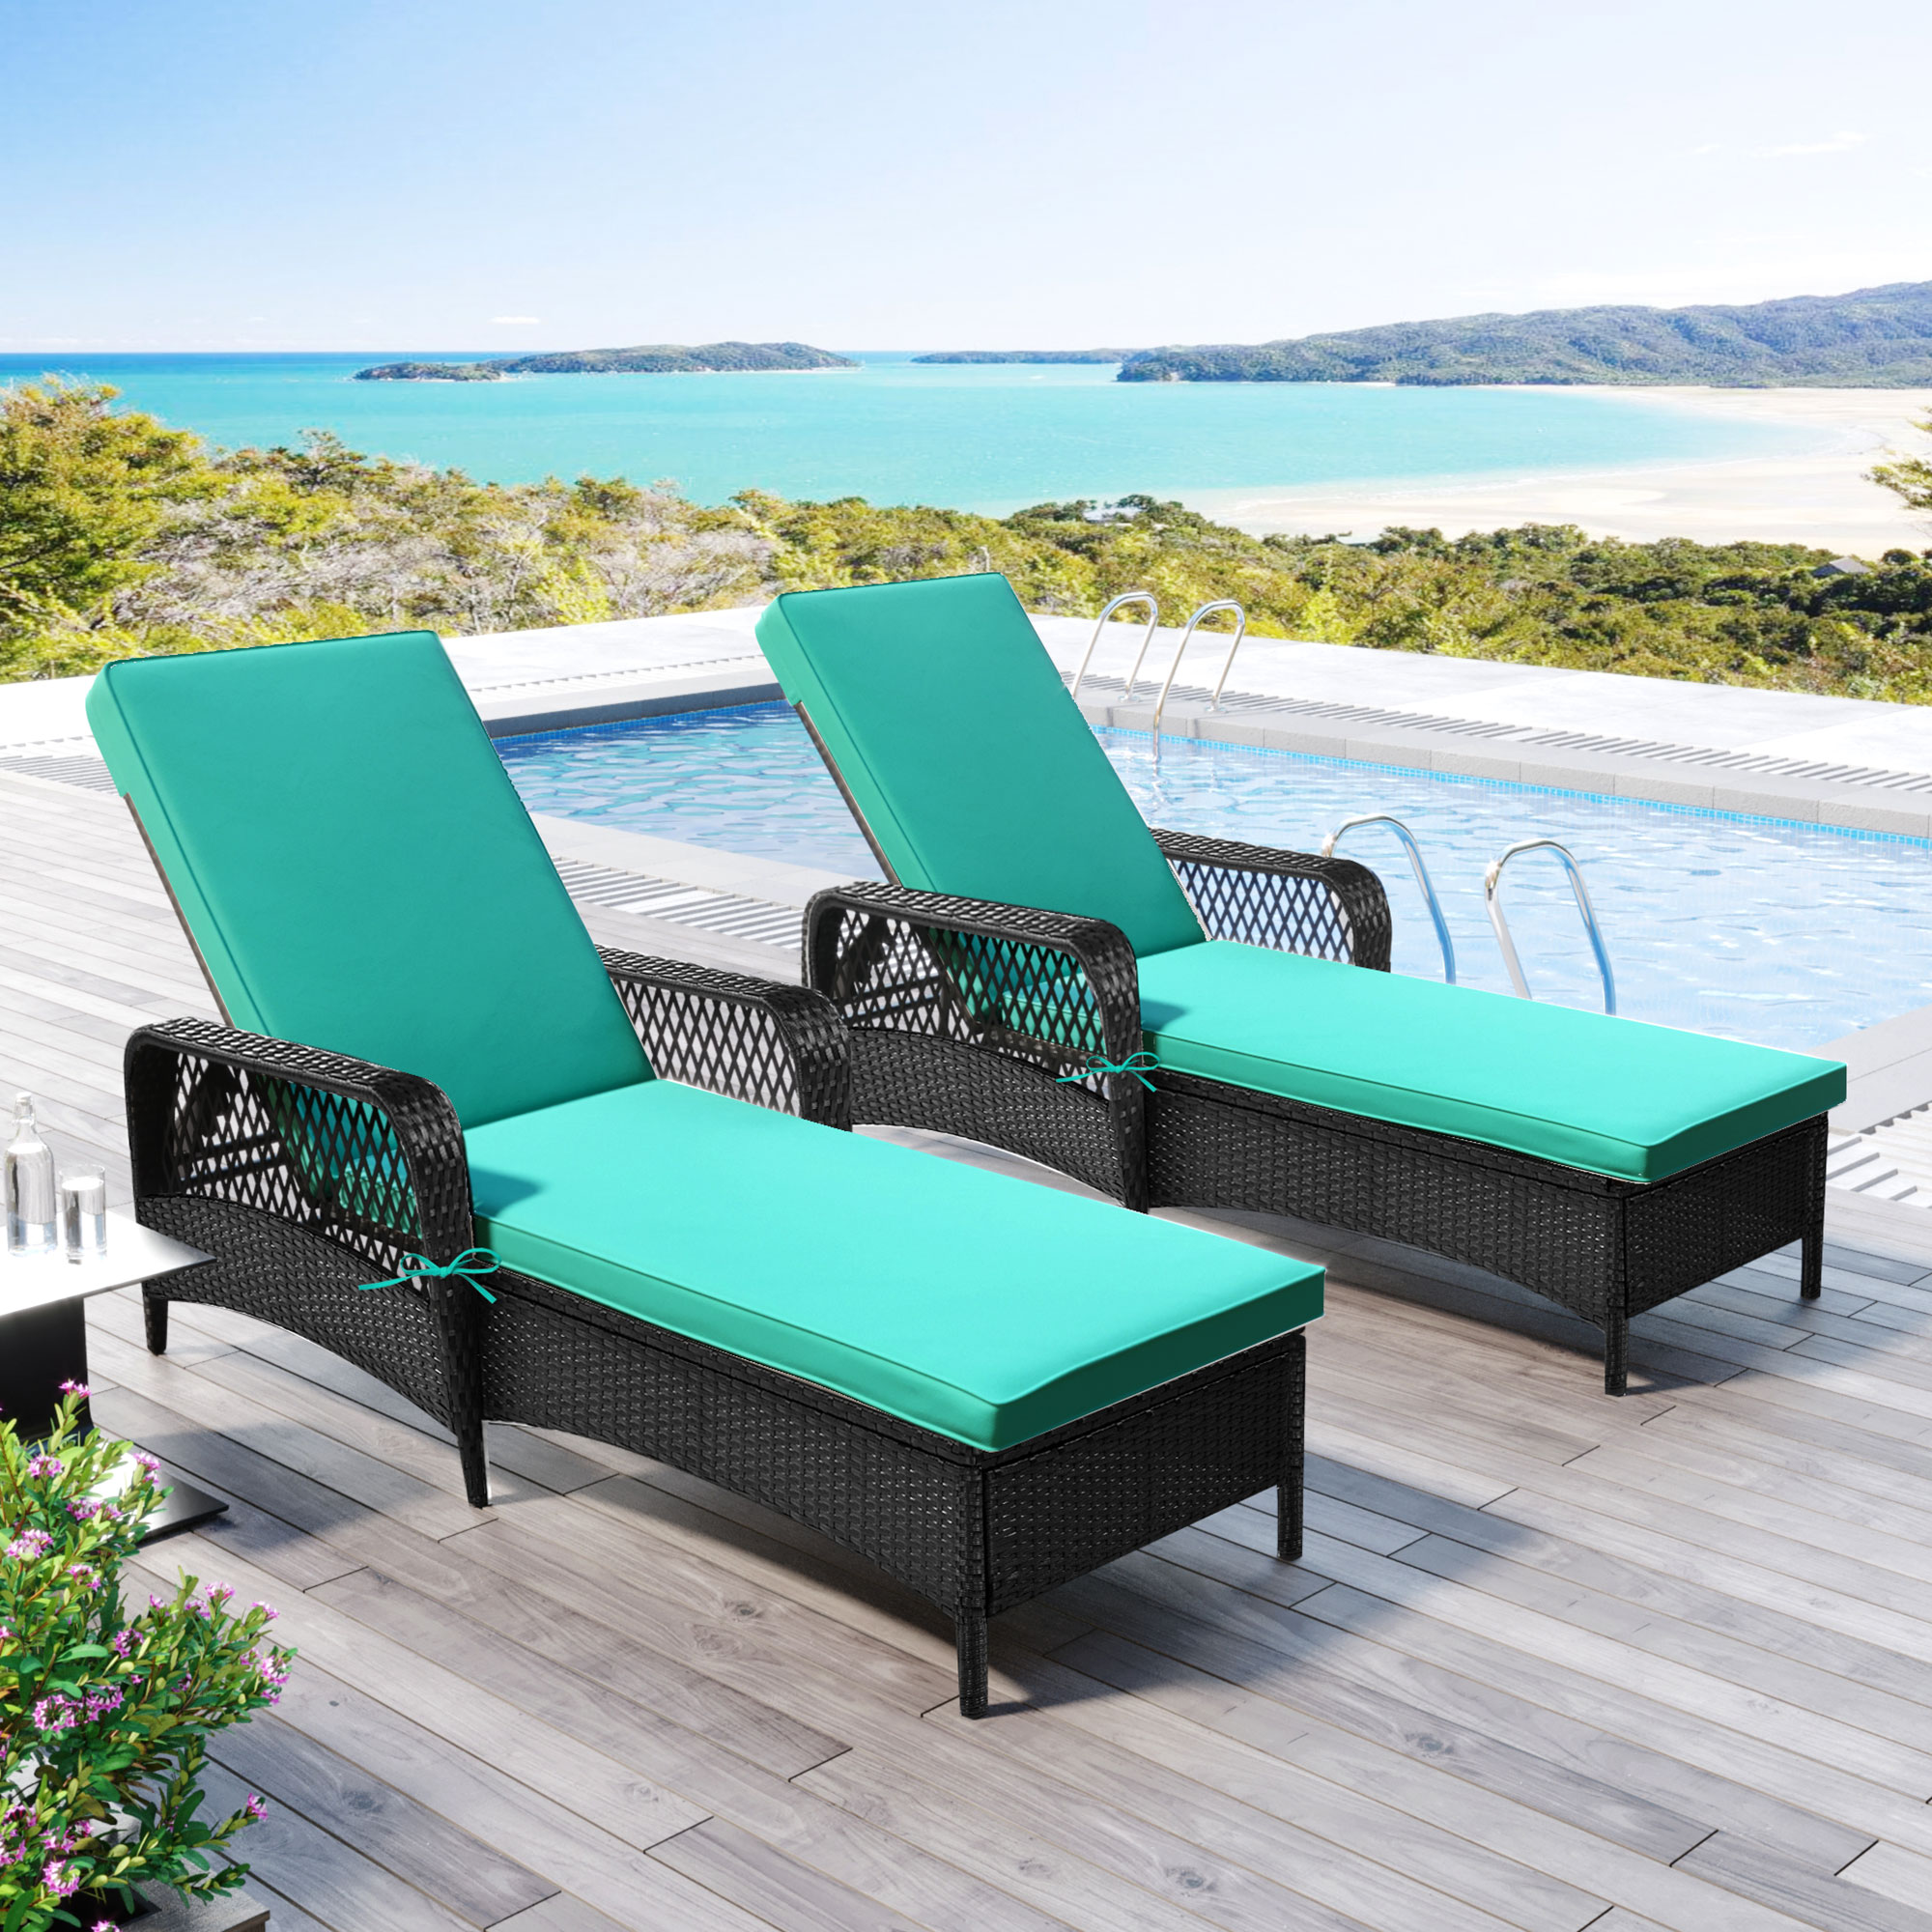 ENYOPRO 2 Piece Outdoor Patio Chaise Lounge Set, PE Wicker Lounge Chairs with Adjustable Backrest Recliners, Reclining Chair Furniture Set with Cushions for Pool Deck Patio Garden, K2701 - image 2 of 10